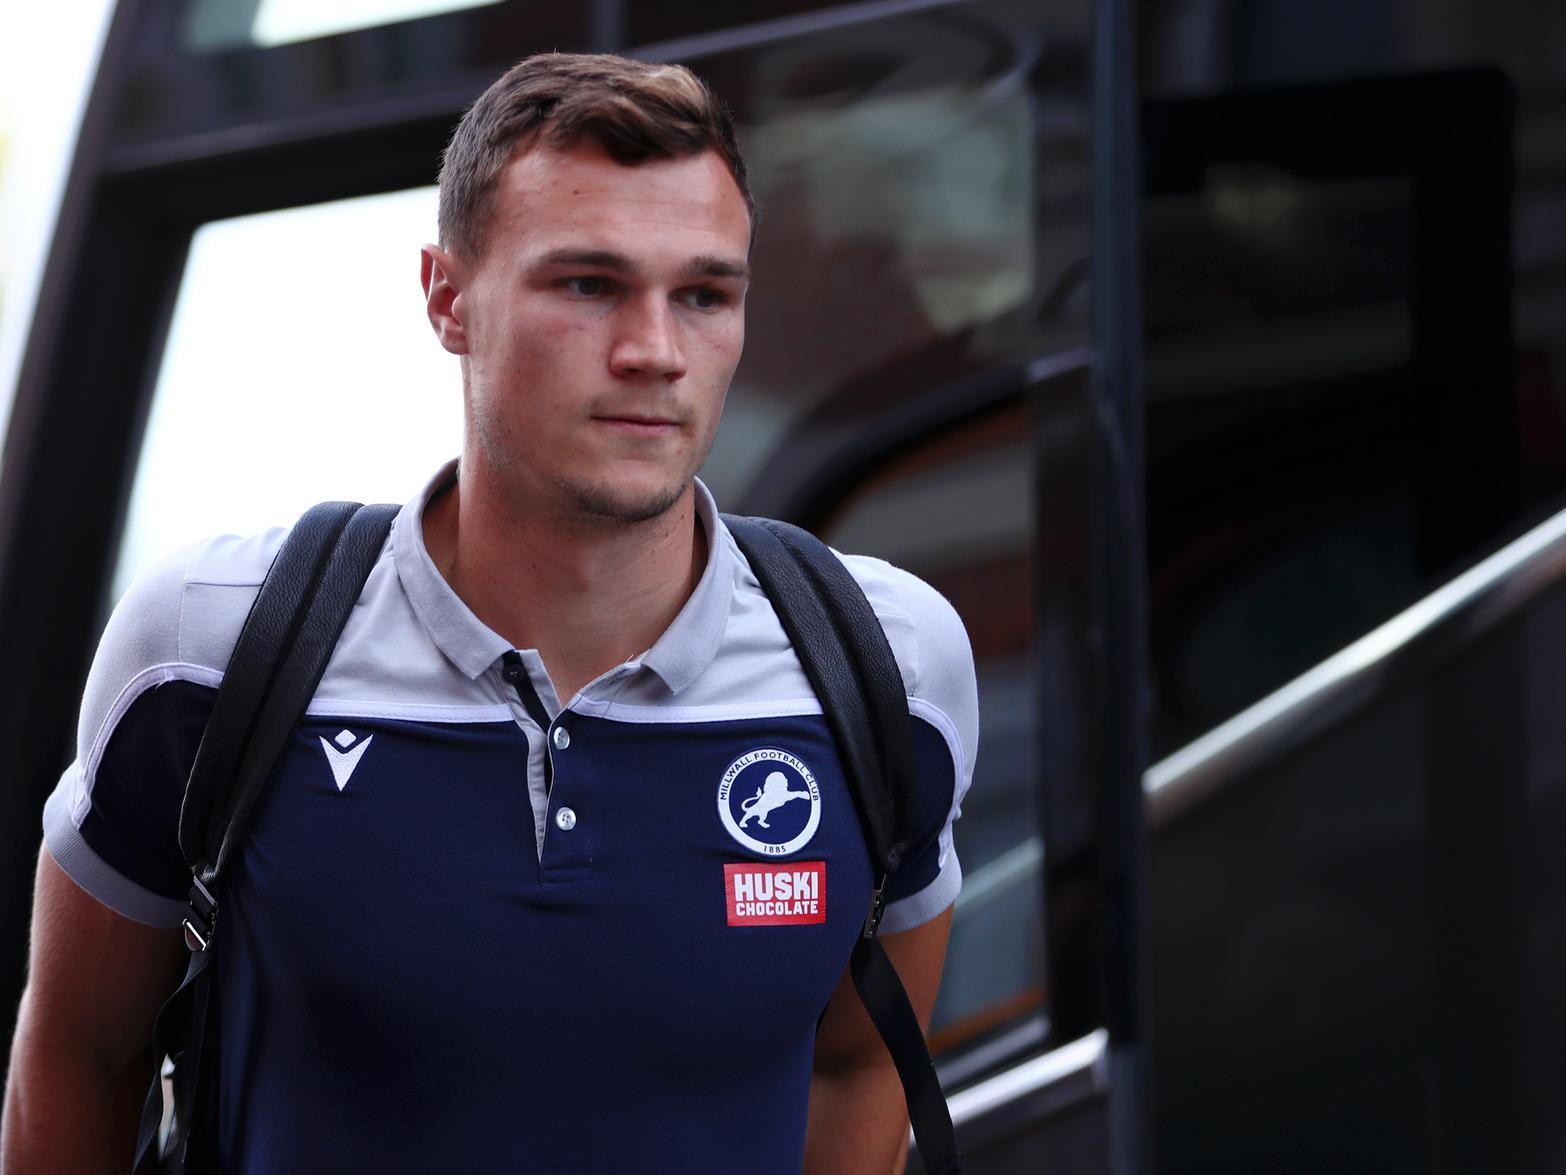 Aston Villa are reportedly planning to snatch Millwall defender Jake Cooper at the end of the season, as they look to shore up their backline following an unimpressive 2019/20 campaign. (Birmingham Mail)